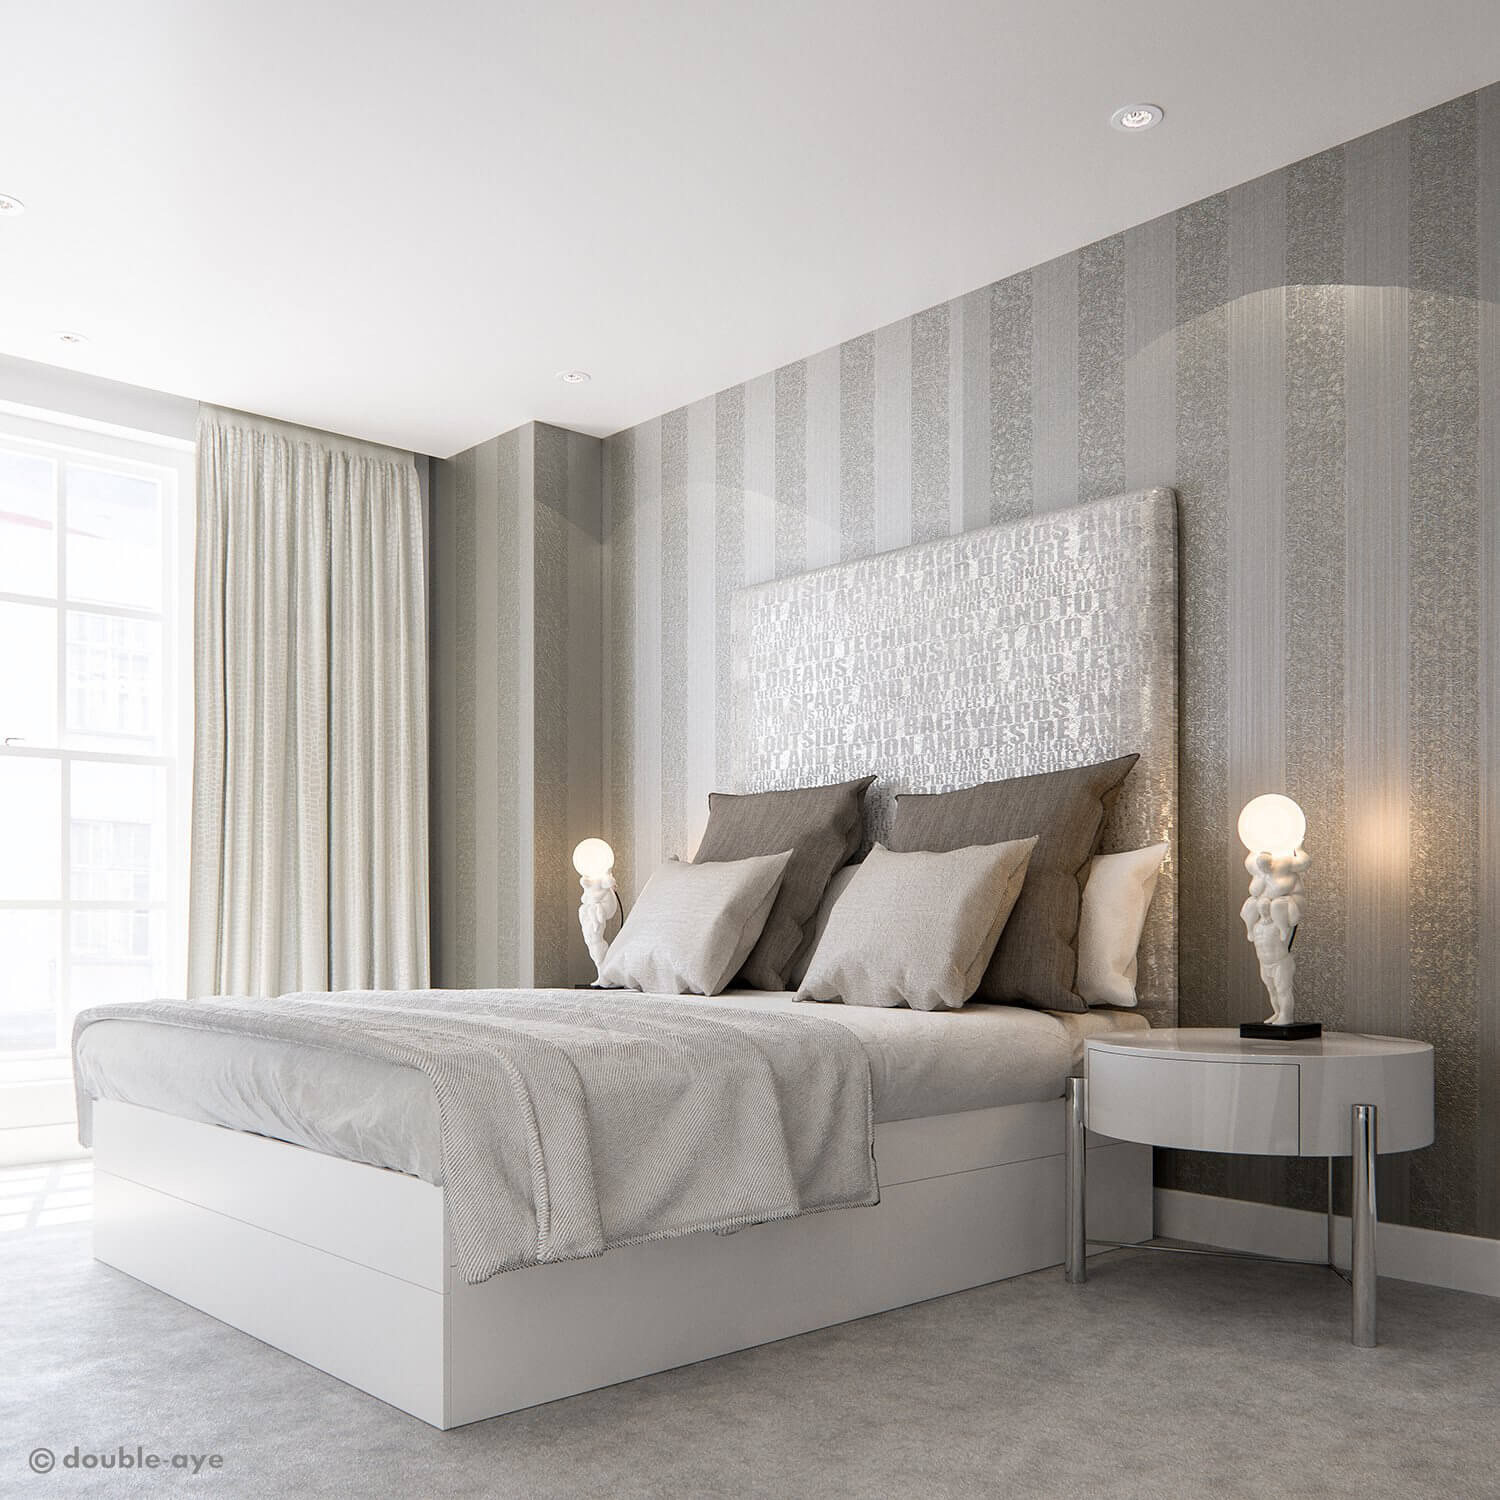 The apple apartments bedroom bed - cgi visualization